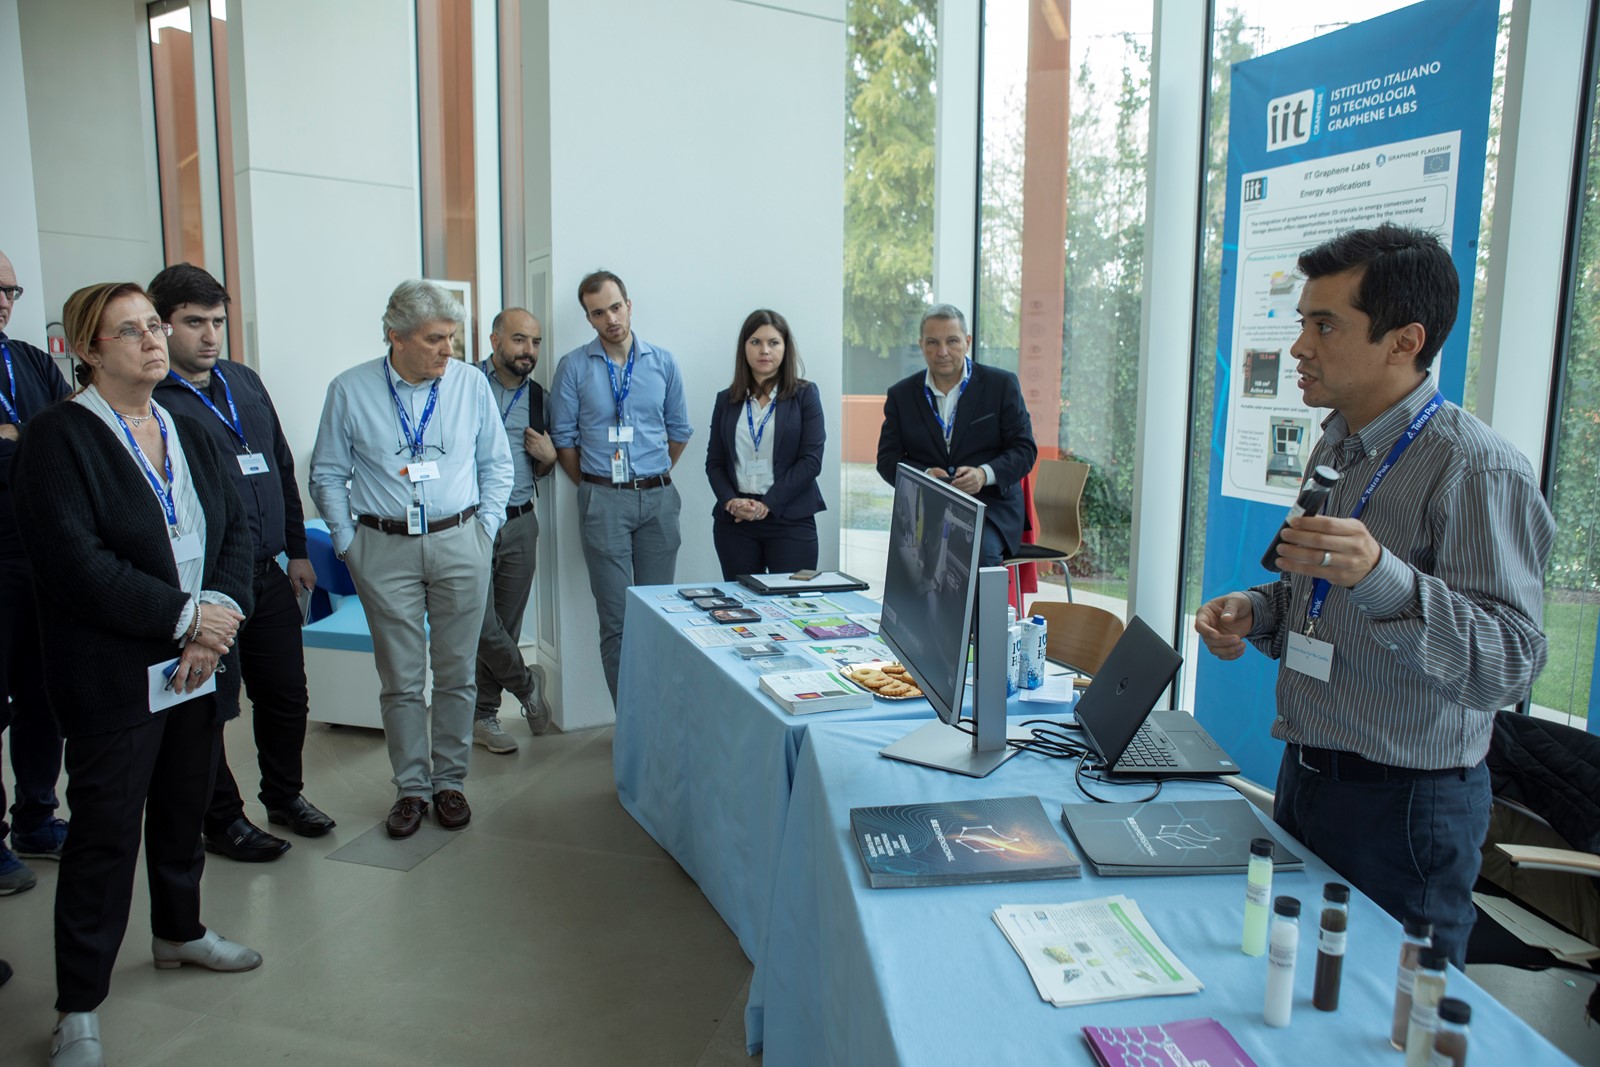 An exhibition of graphene products and prototypes was held at the Graphene Flagship's Tetra Pak Marketplace event